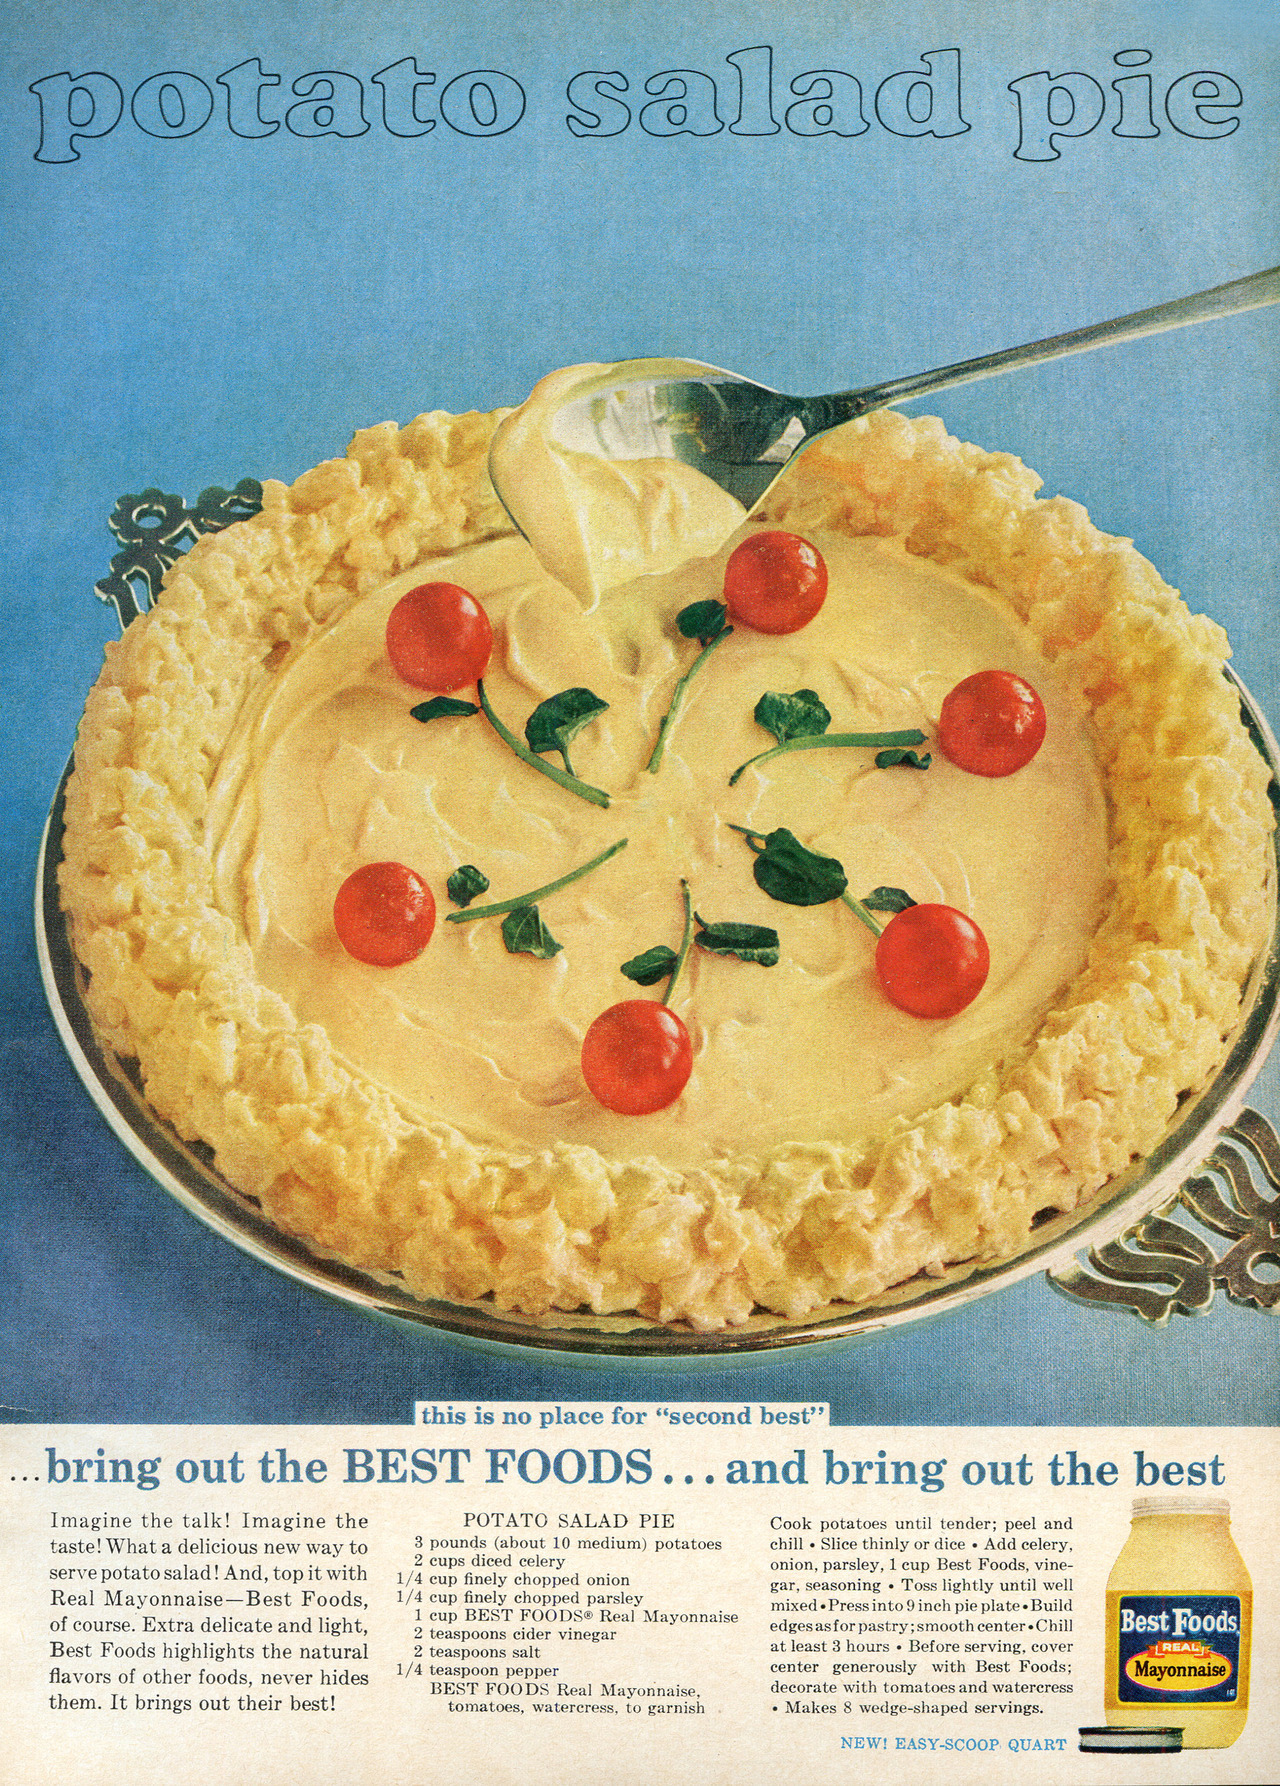 Best Foods Mayonnaise - published in Family Circle - July 1963